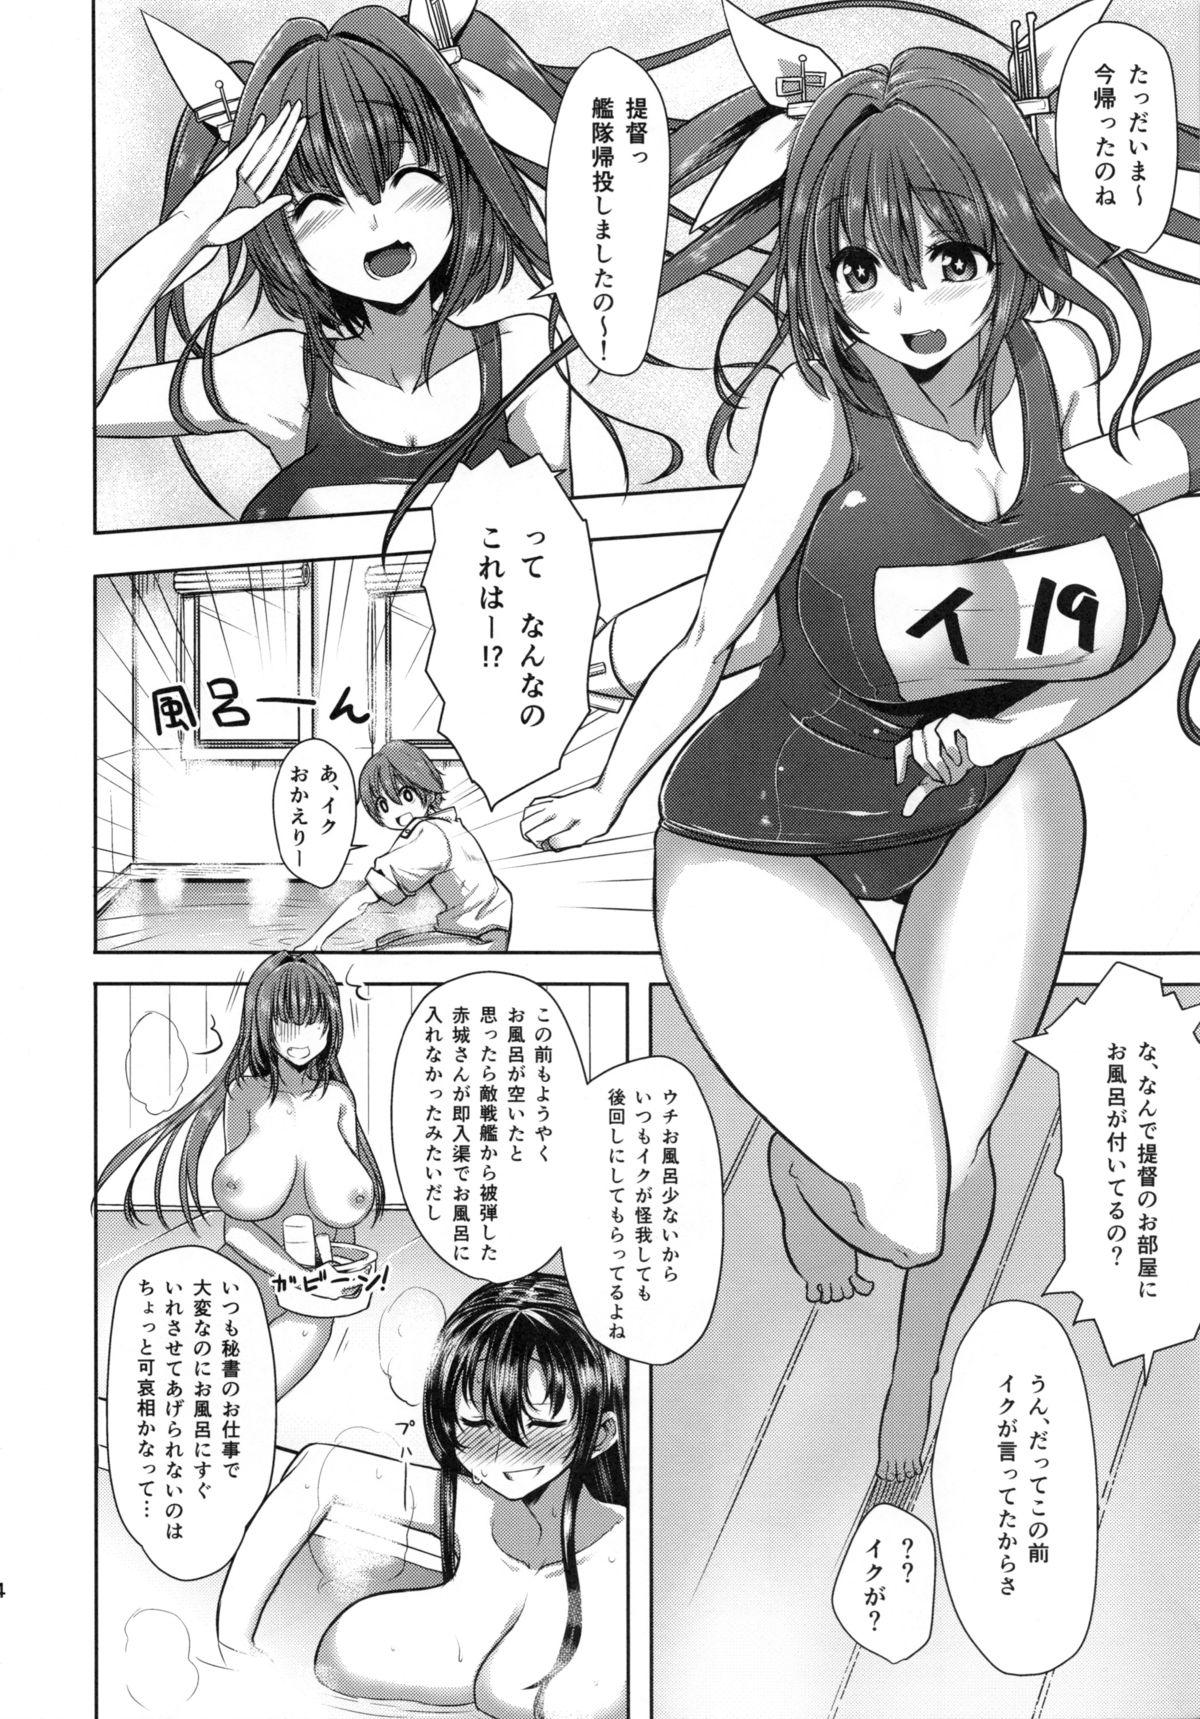 Pussylick I-19 to Icchau?? - Kantai collection Stepsister - Page 3